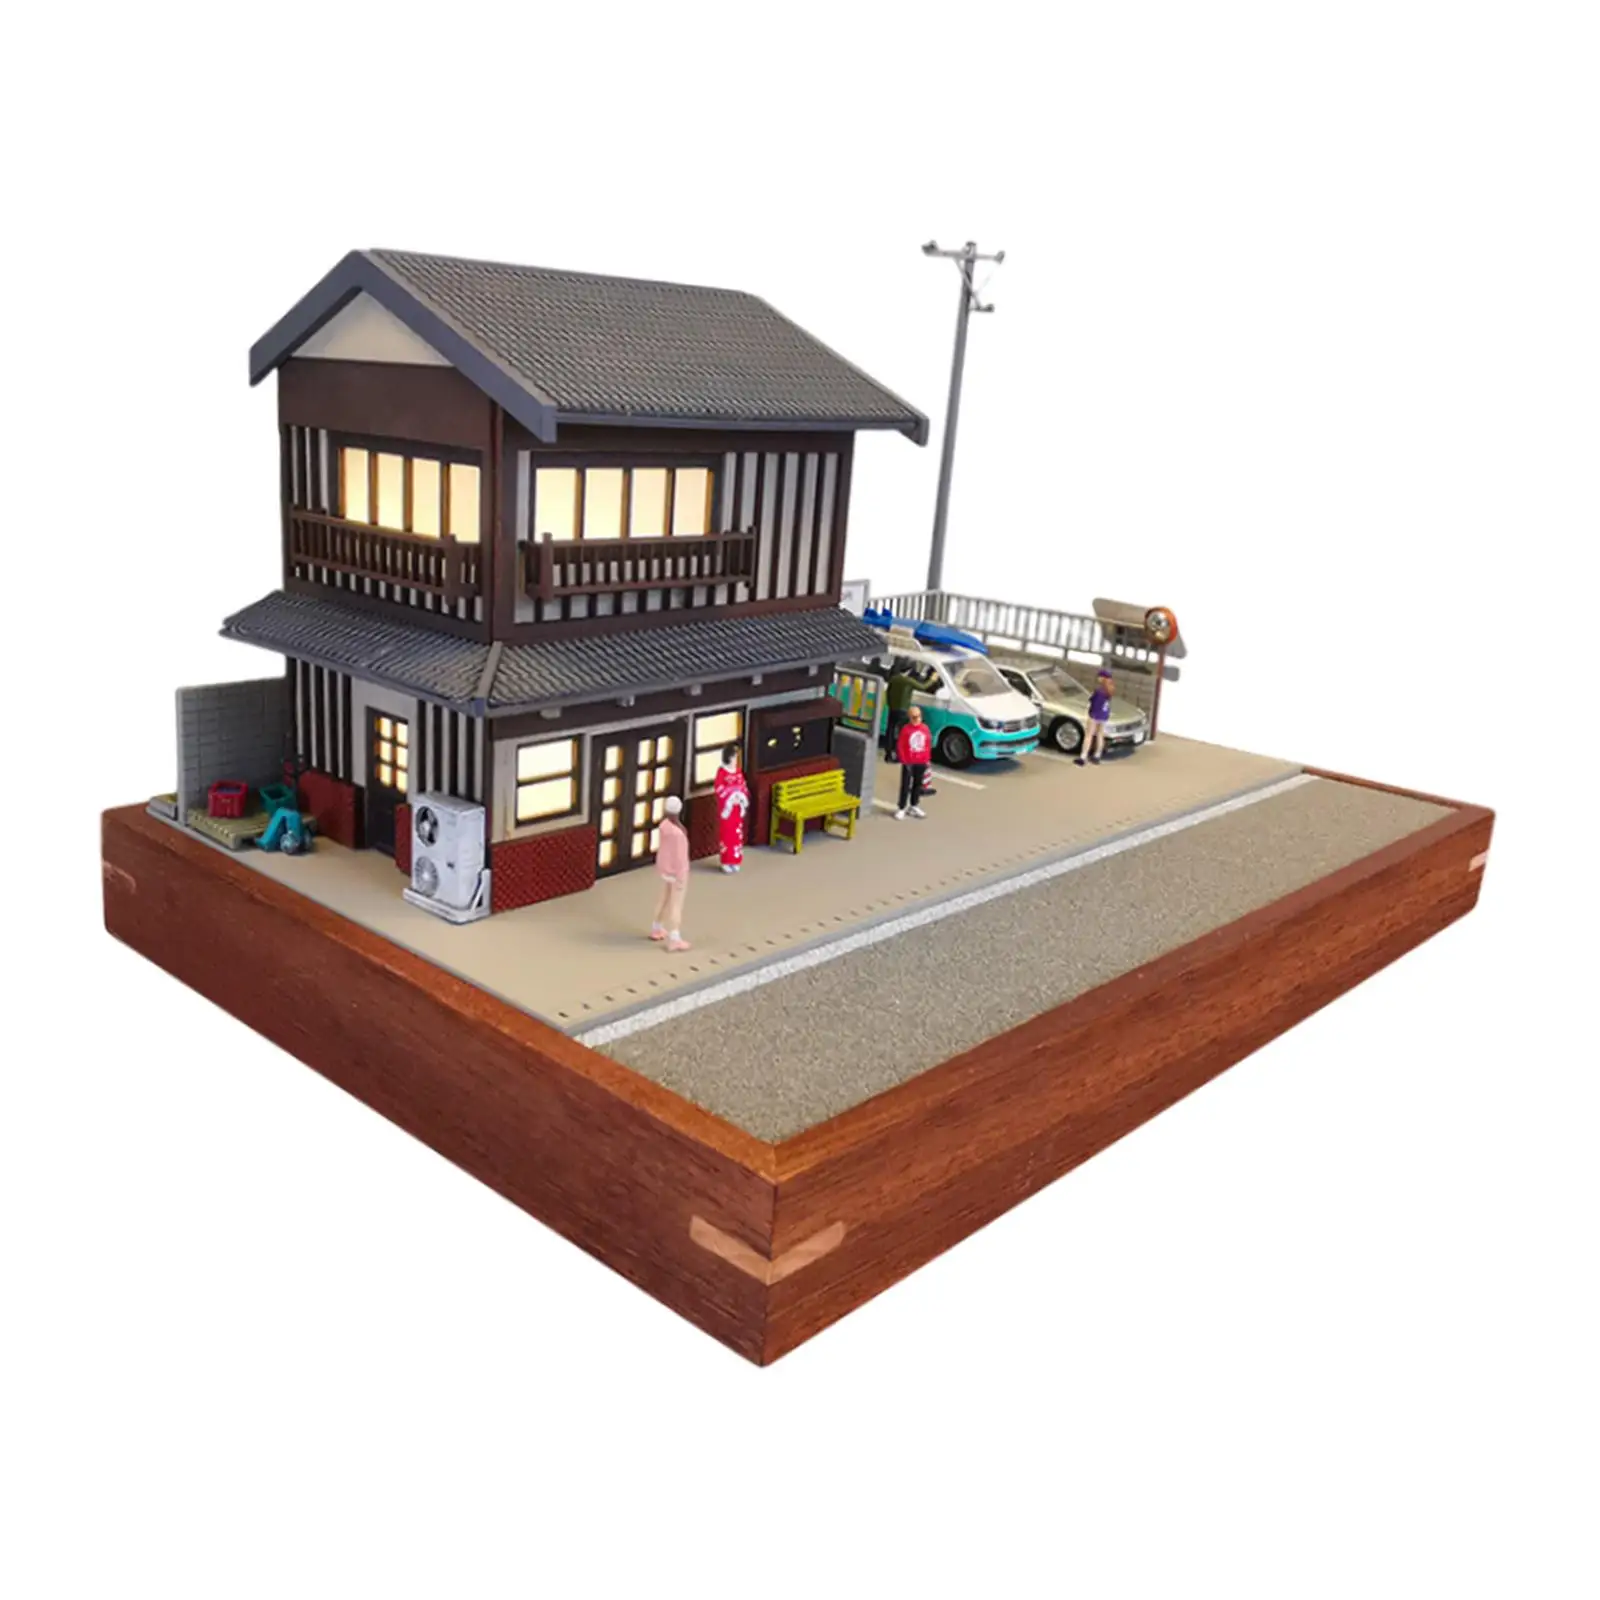 1/64 Model House for DIY Projects Accessory Diorama Layout Sand Table Decor